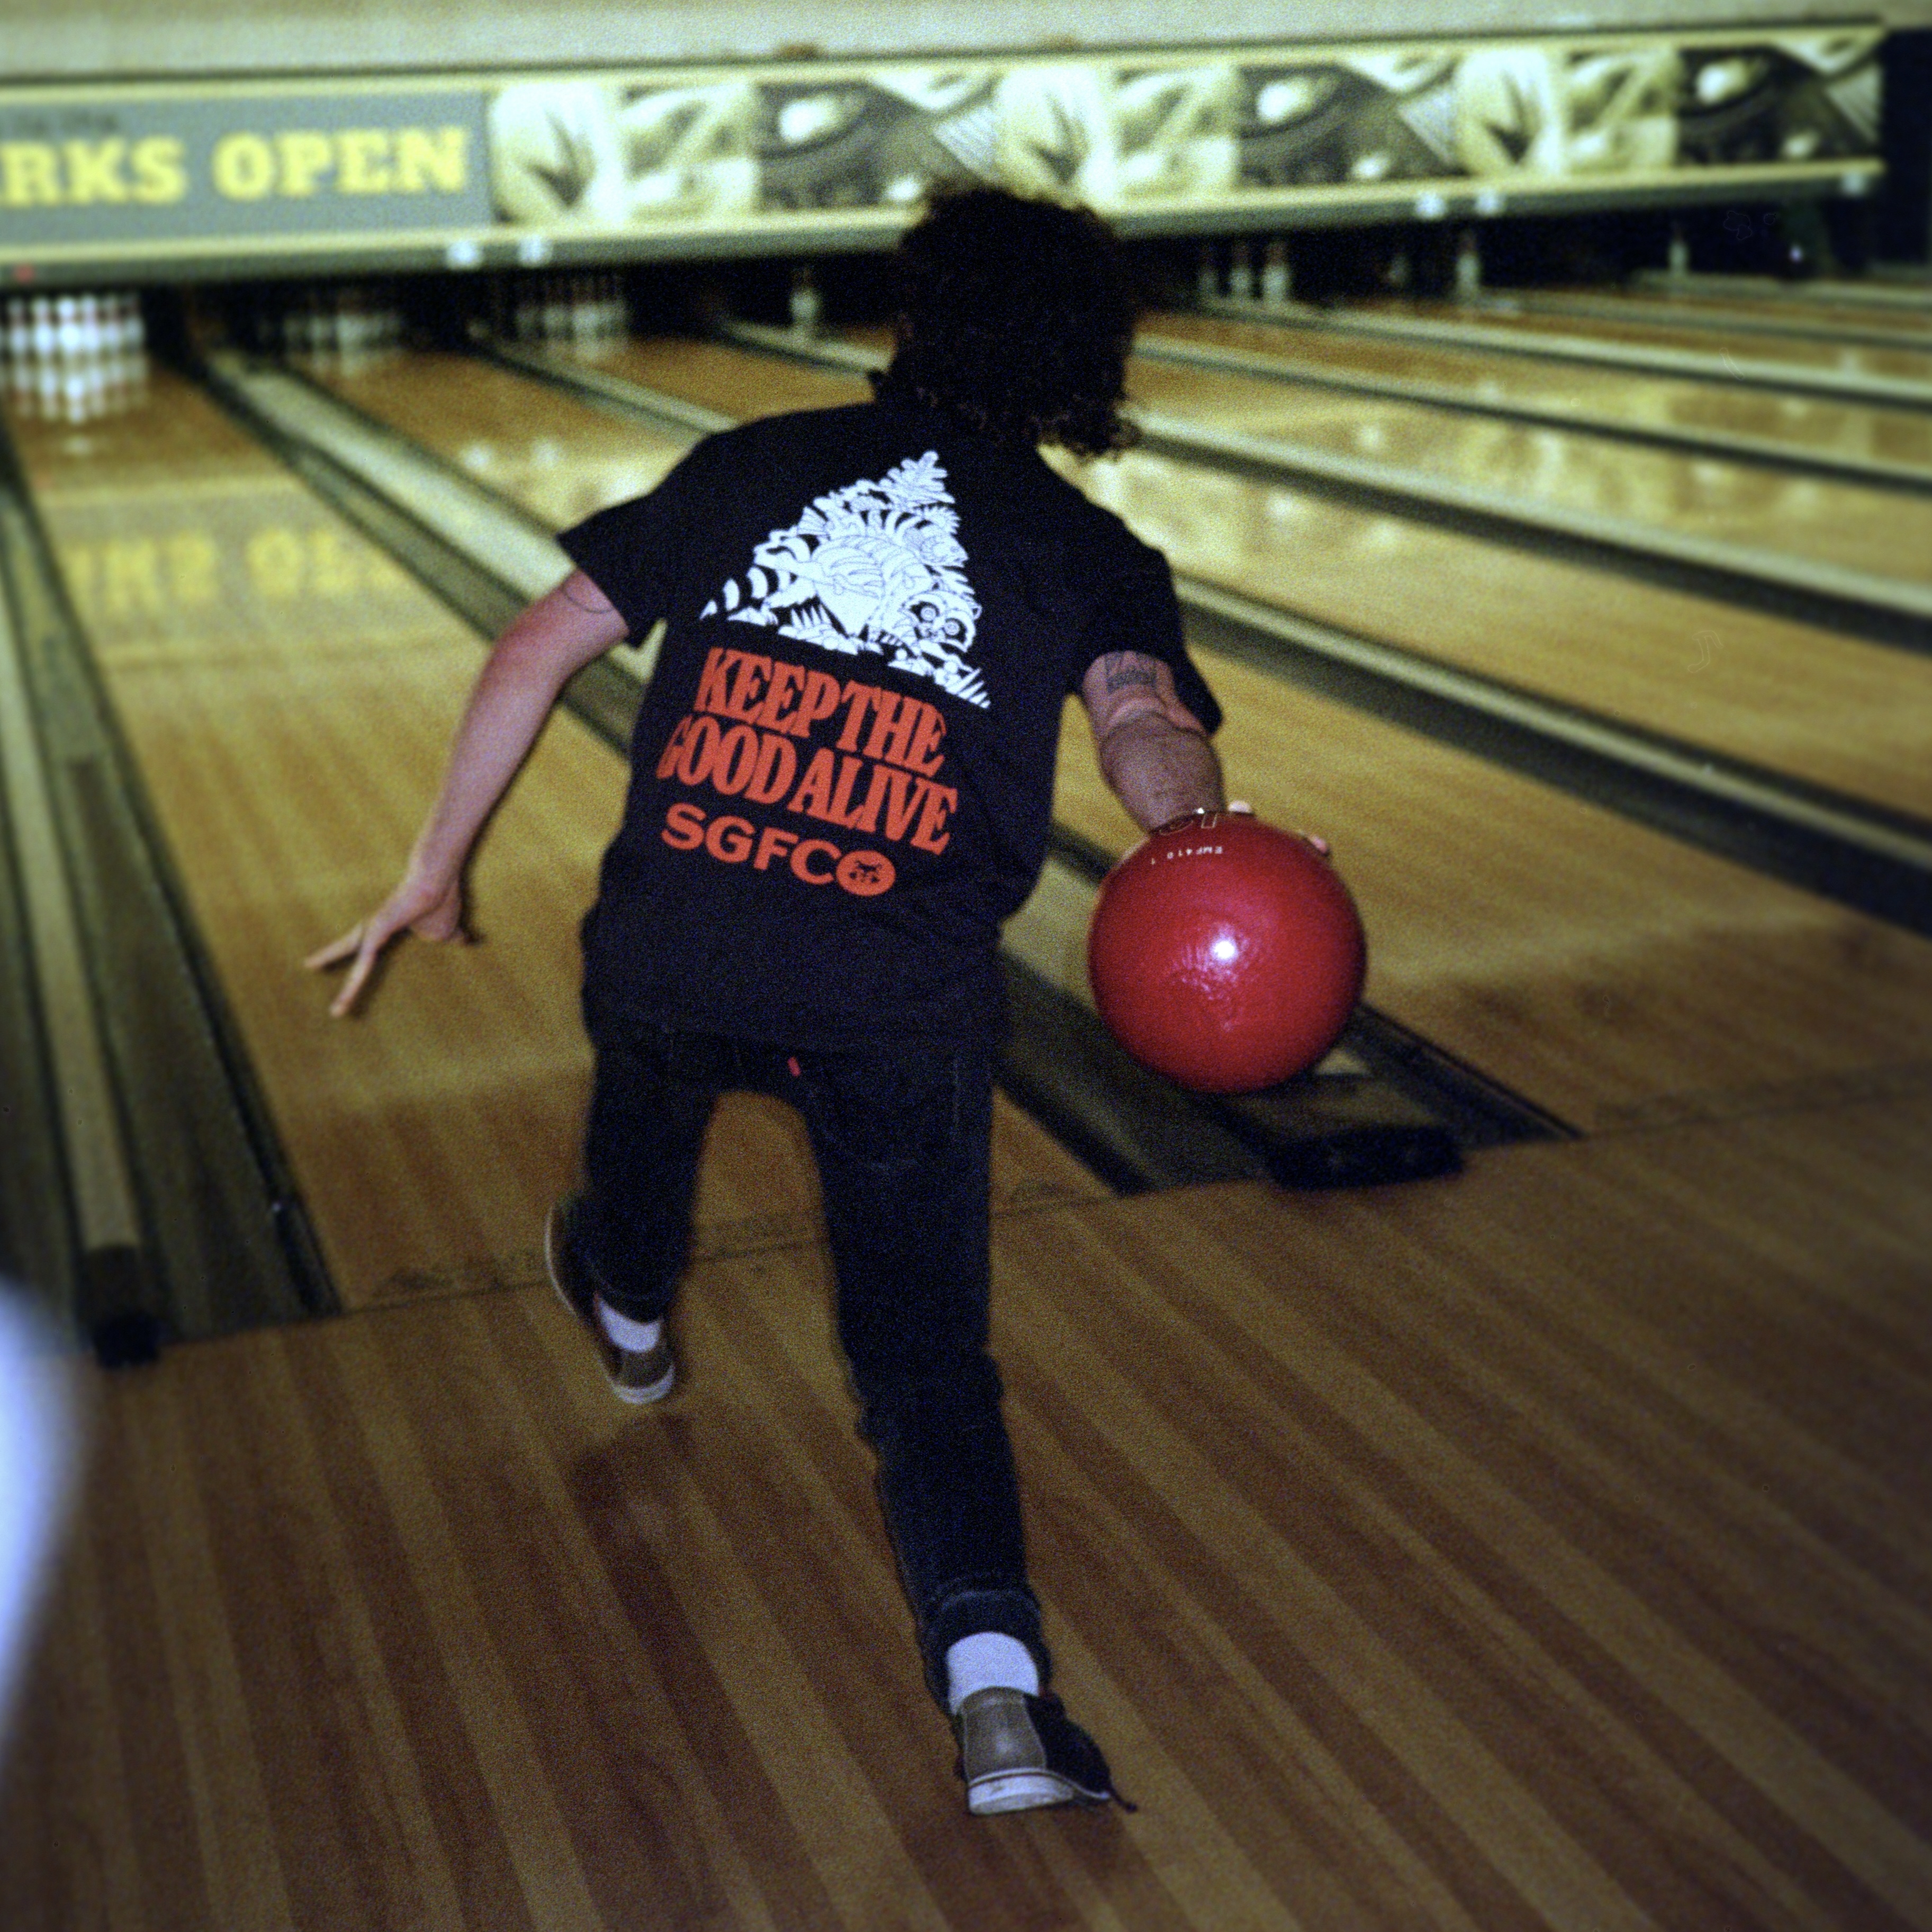 A bowler prepares to roll a red ball down a bowling lane